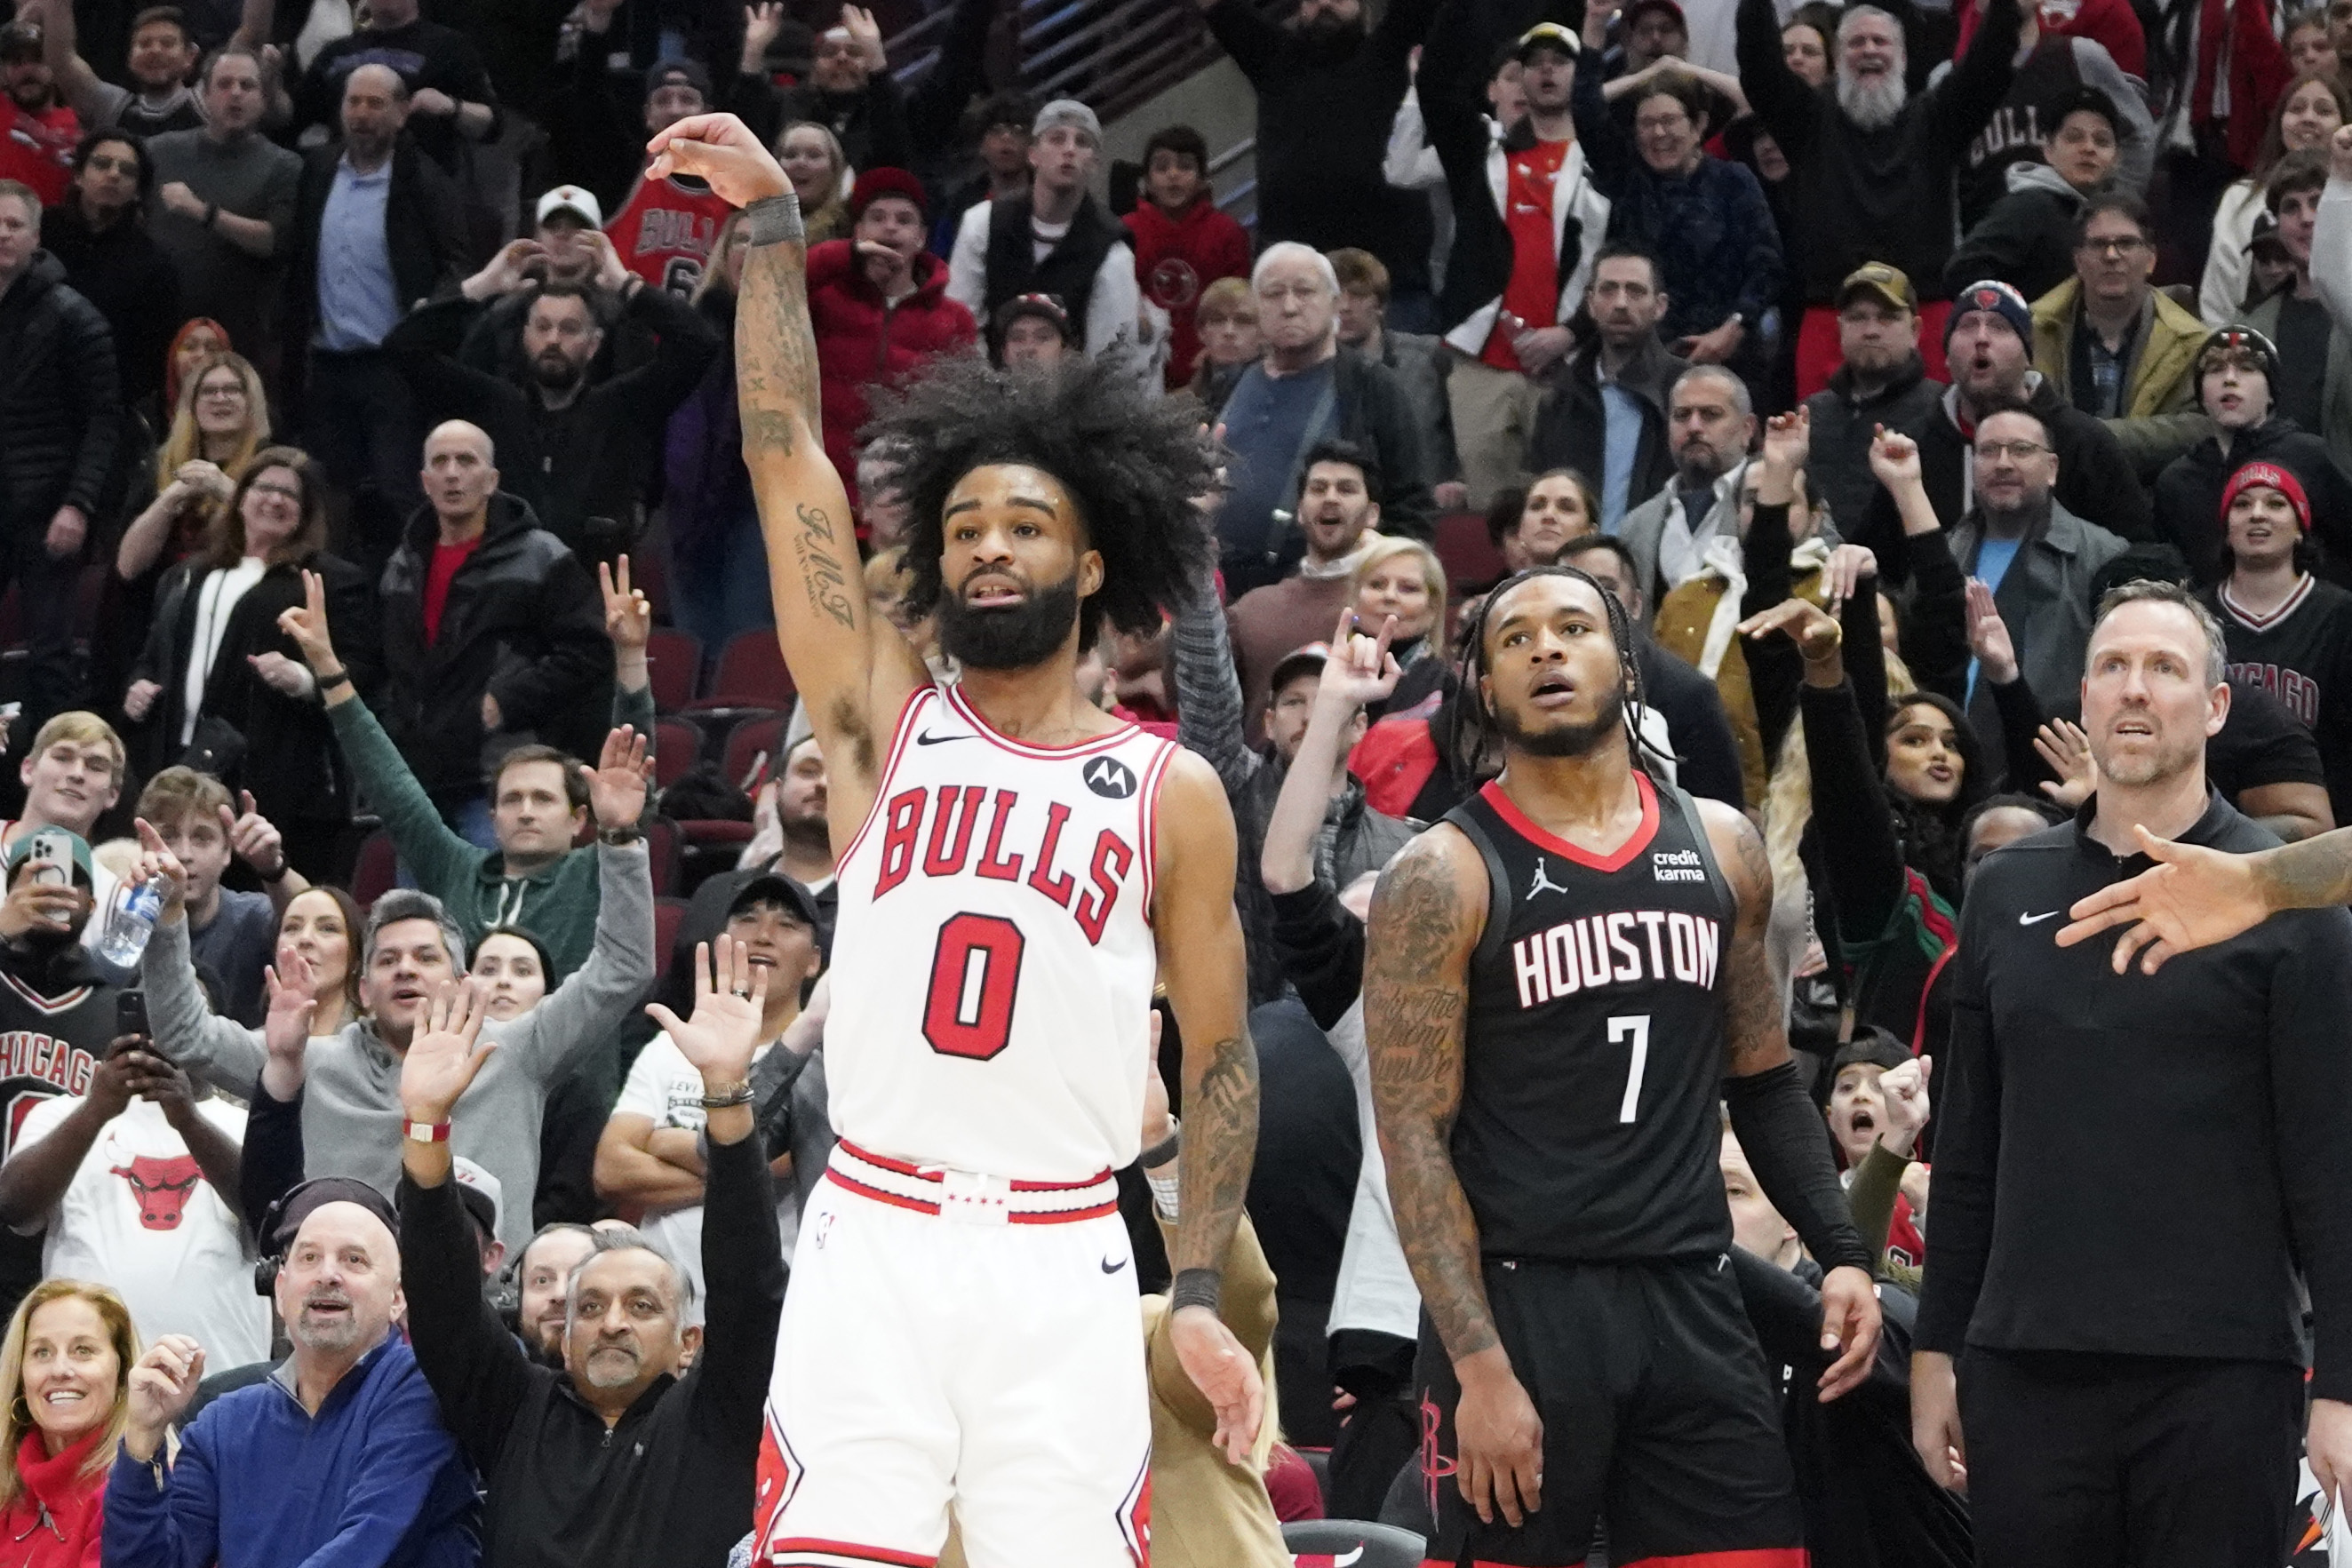 Bulls can't hold big lead, but top Rockets in OT